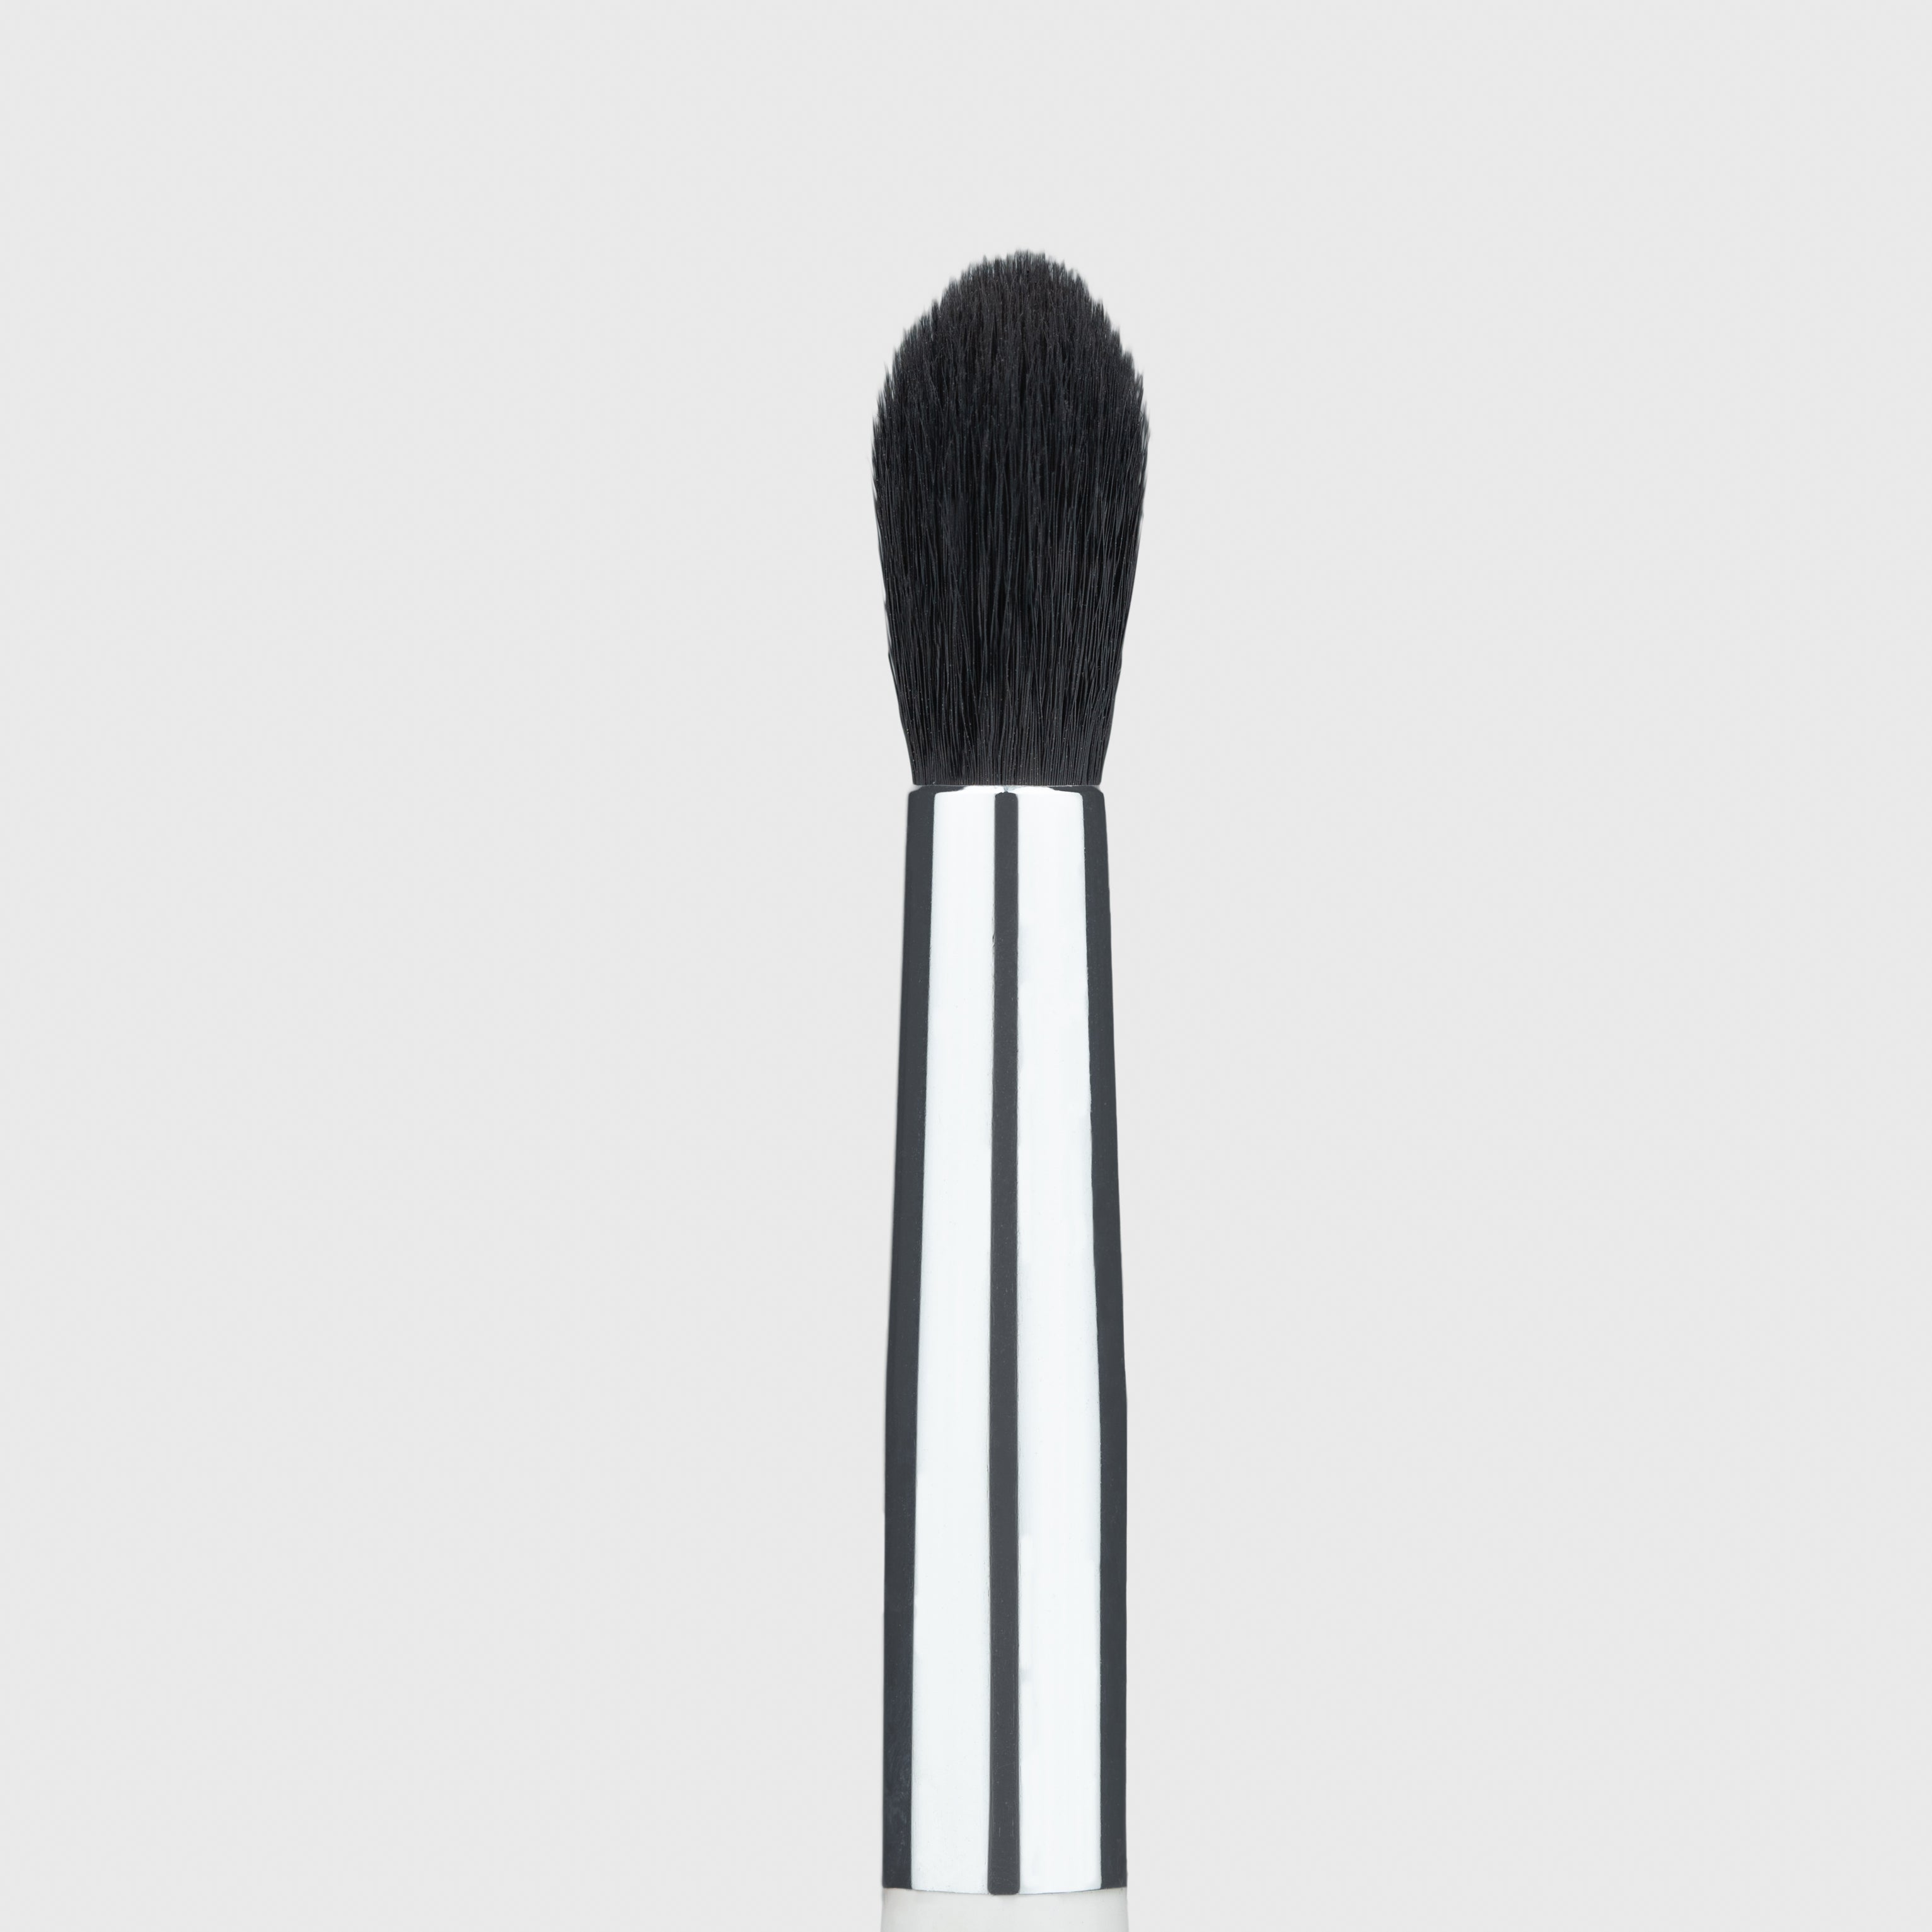 Close up of the larger and thicker end of the Woosh Beauty eye detailer brush